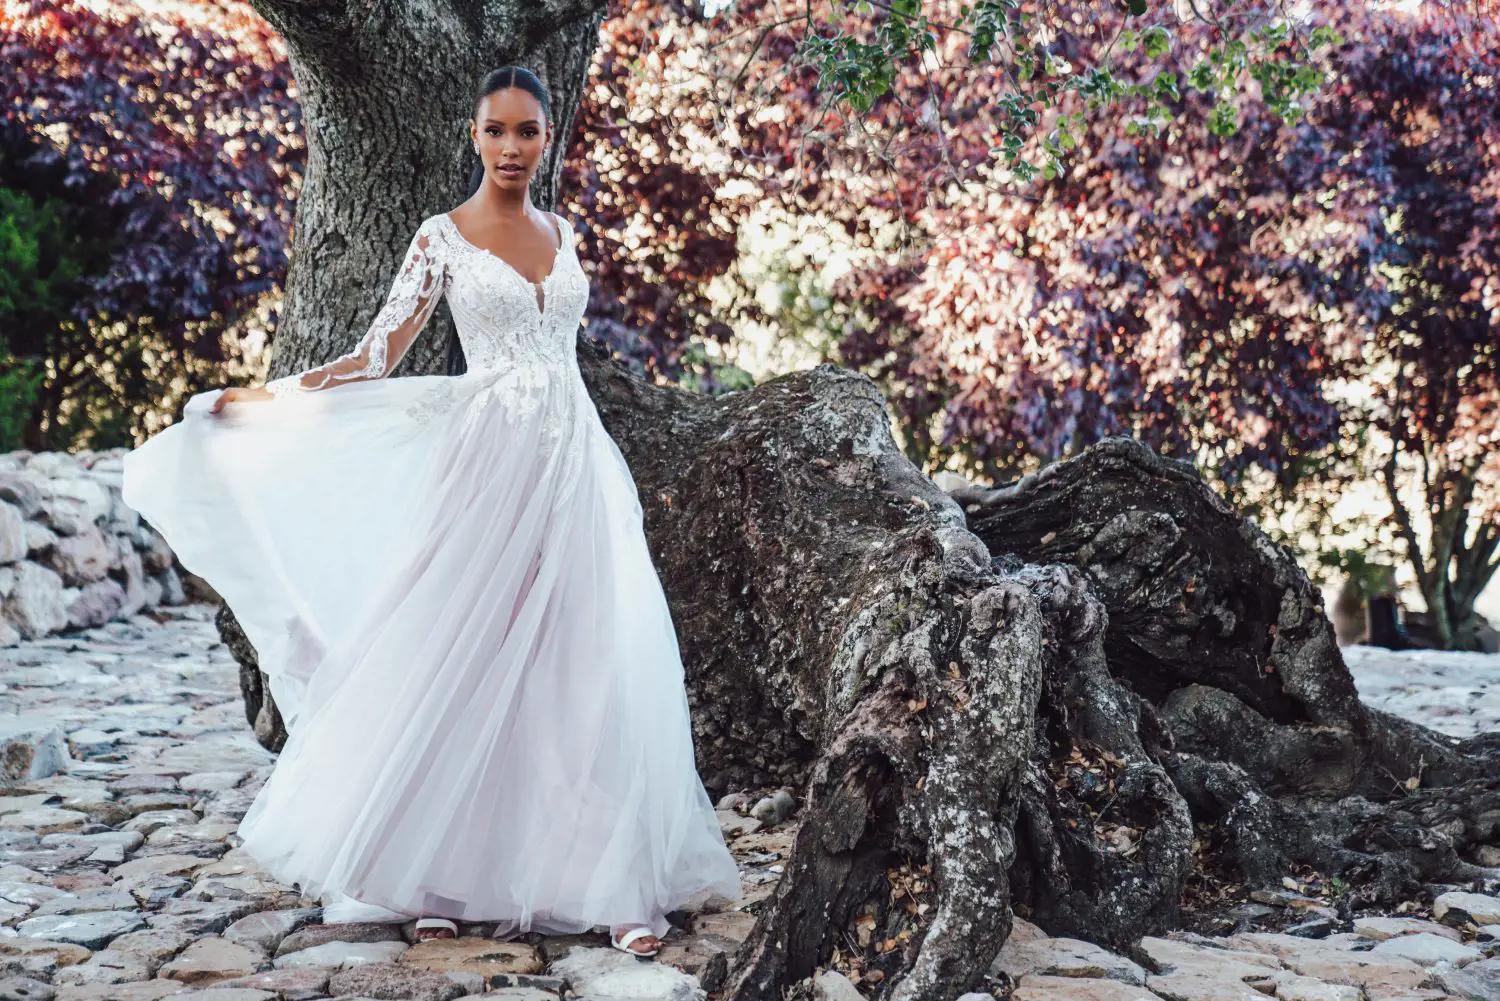 Model wearing a bridal gown under the tree